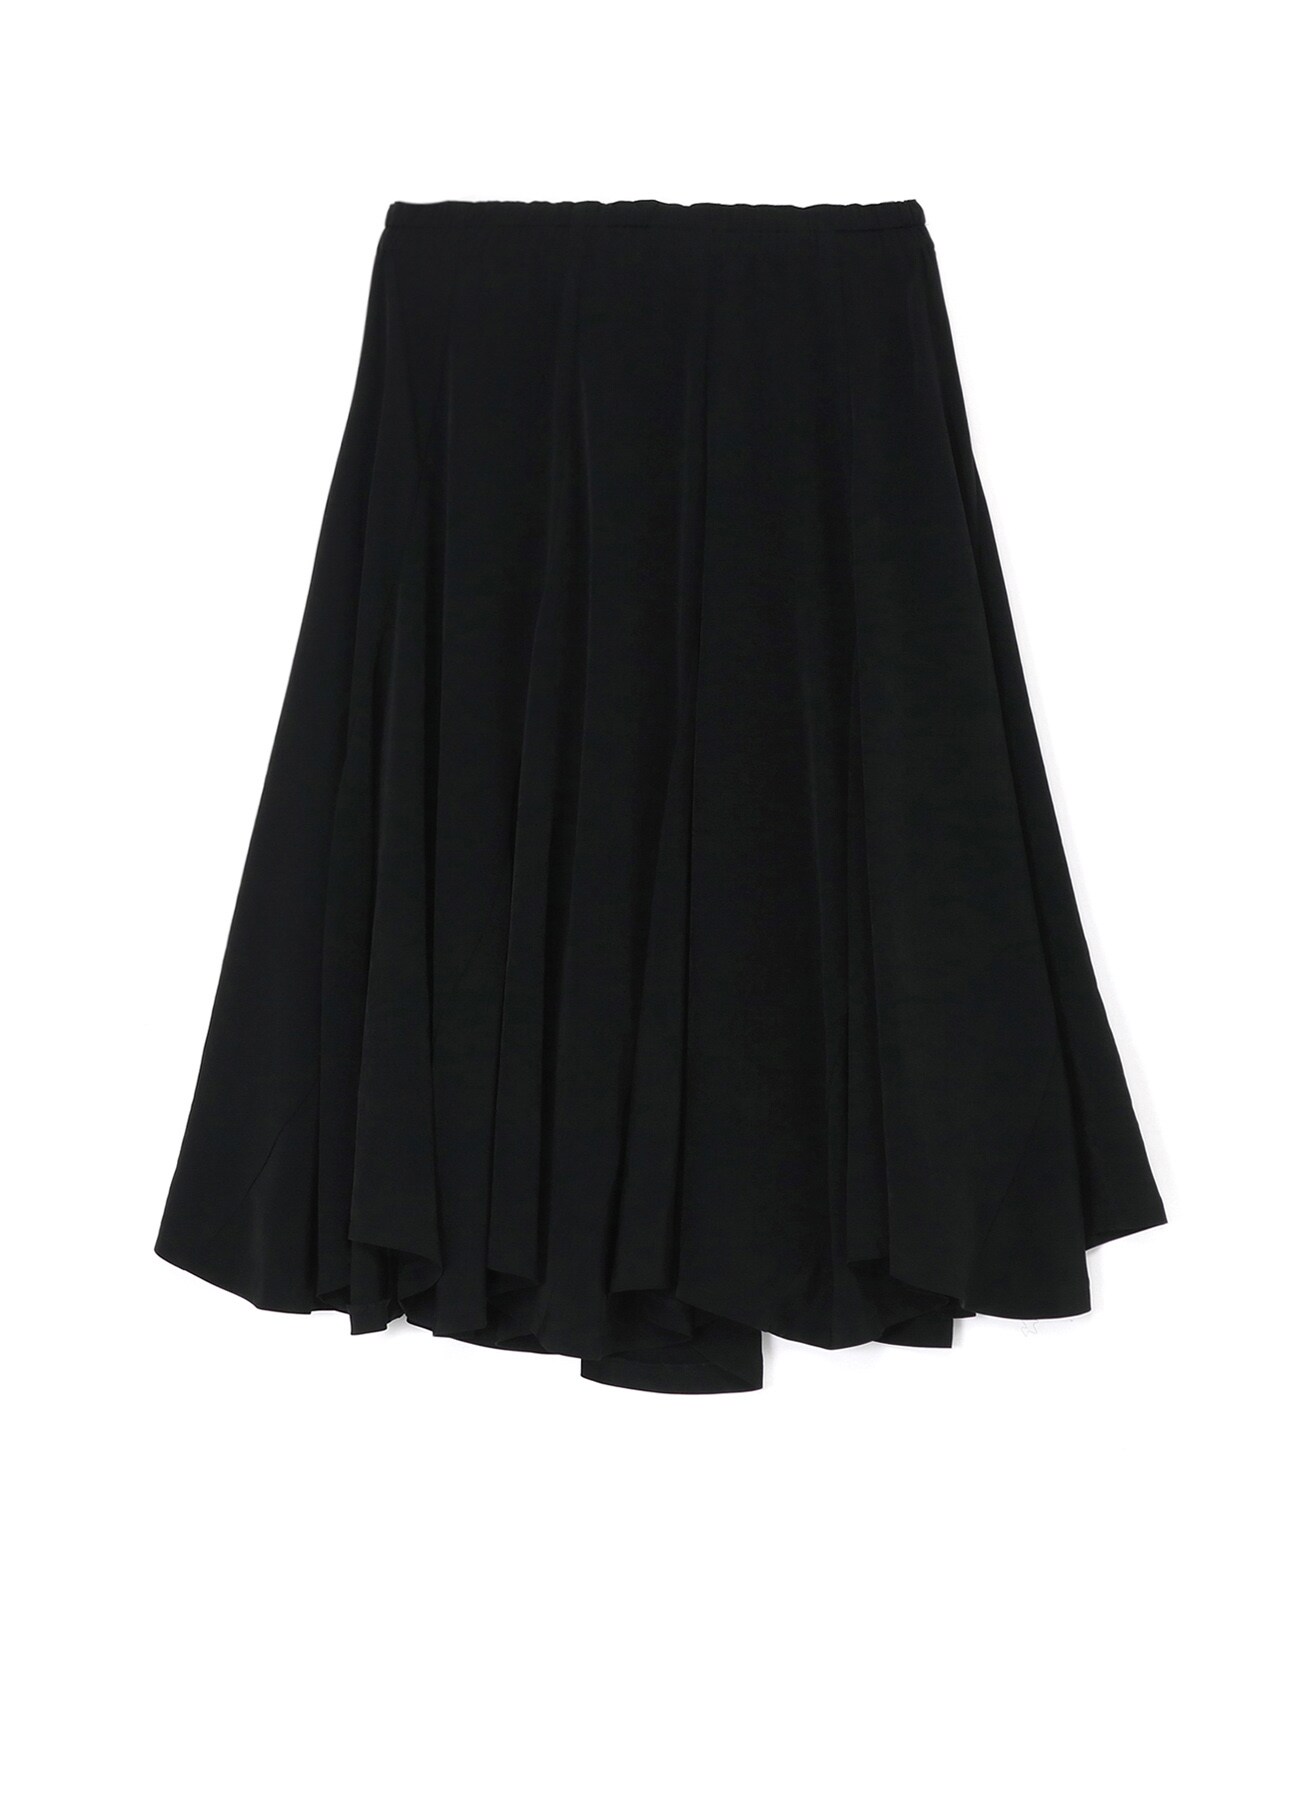 TRIACETATE/POLYESTER CREPE de CHINE 10PIECES GATHERED SKIRT